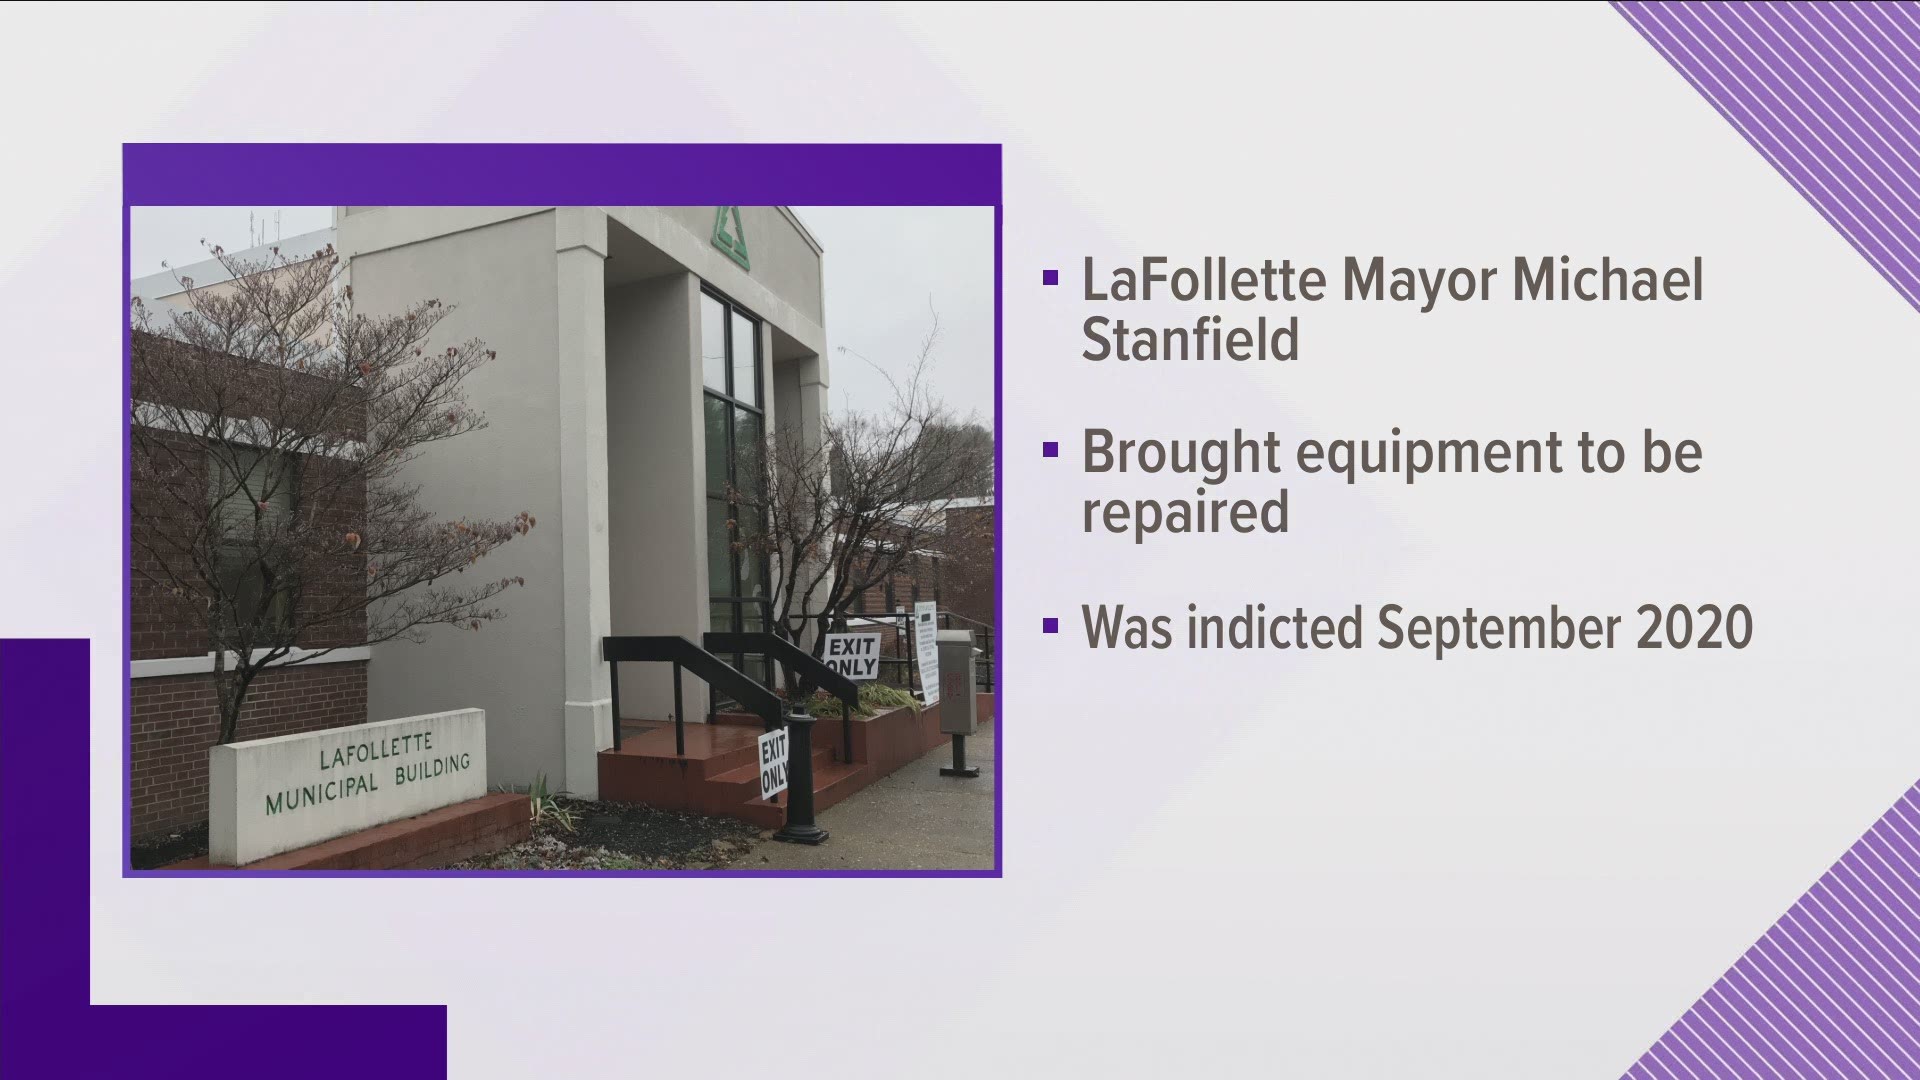 A state investigator found LaFollette's mayor used city services for personal gain.